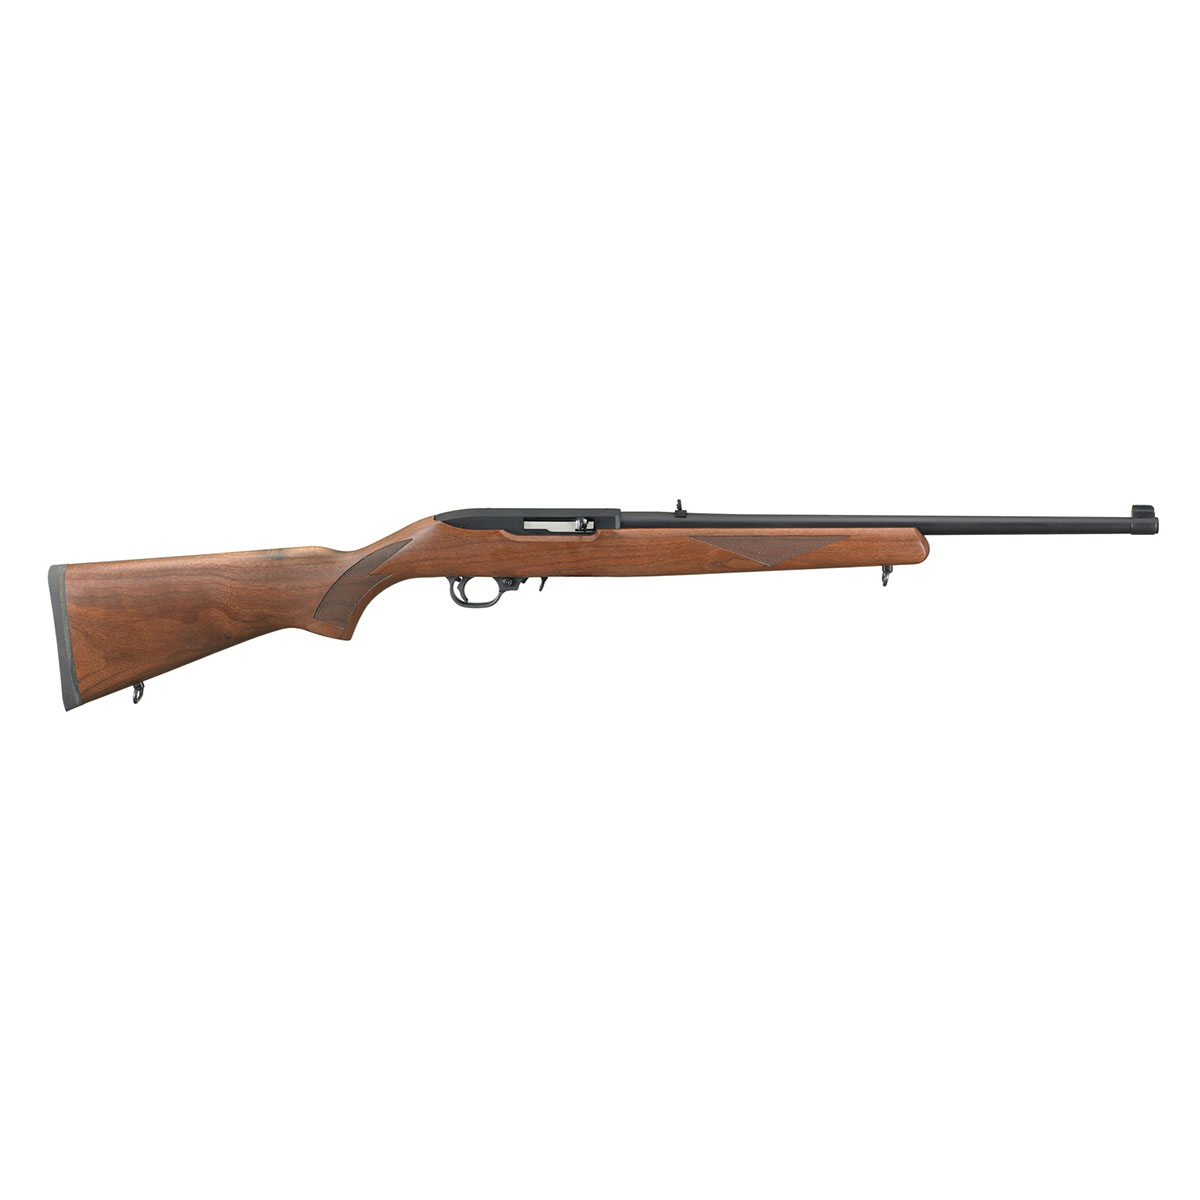 RUGER - 10/22® SPORTER  22 LONG RIFLE SEMI-AUTO RIFLE